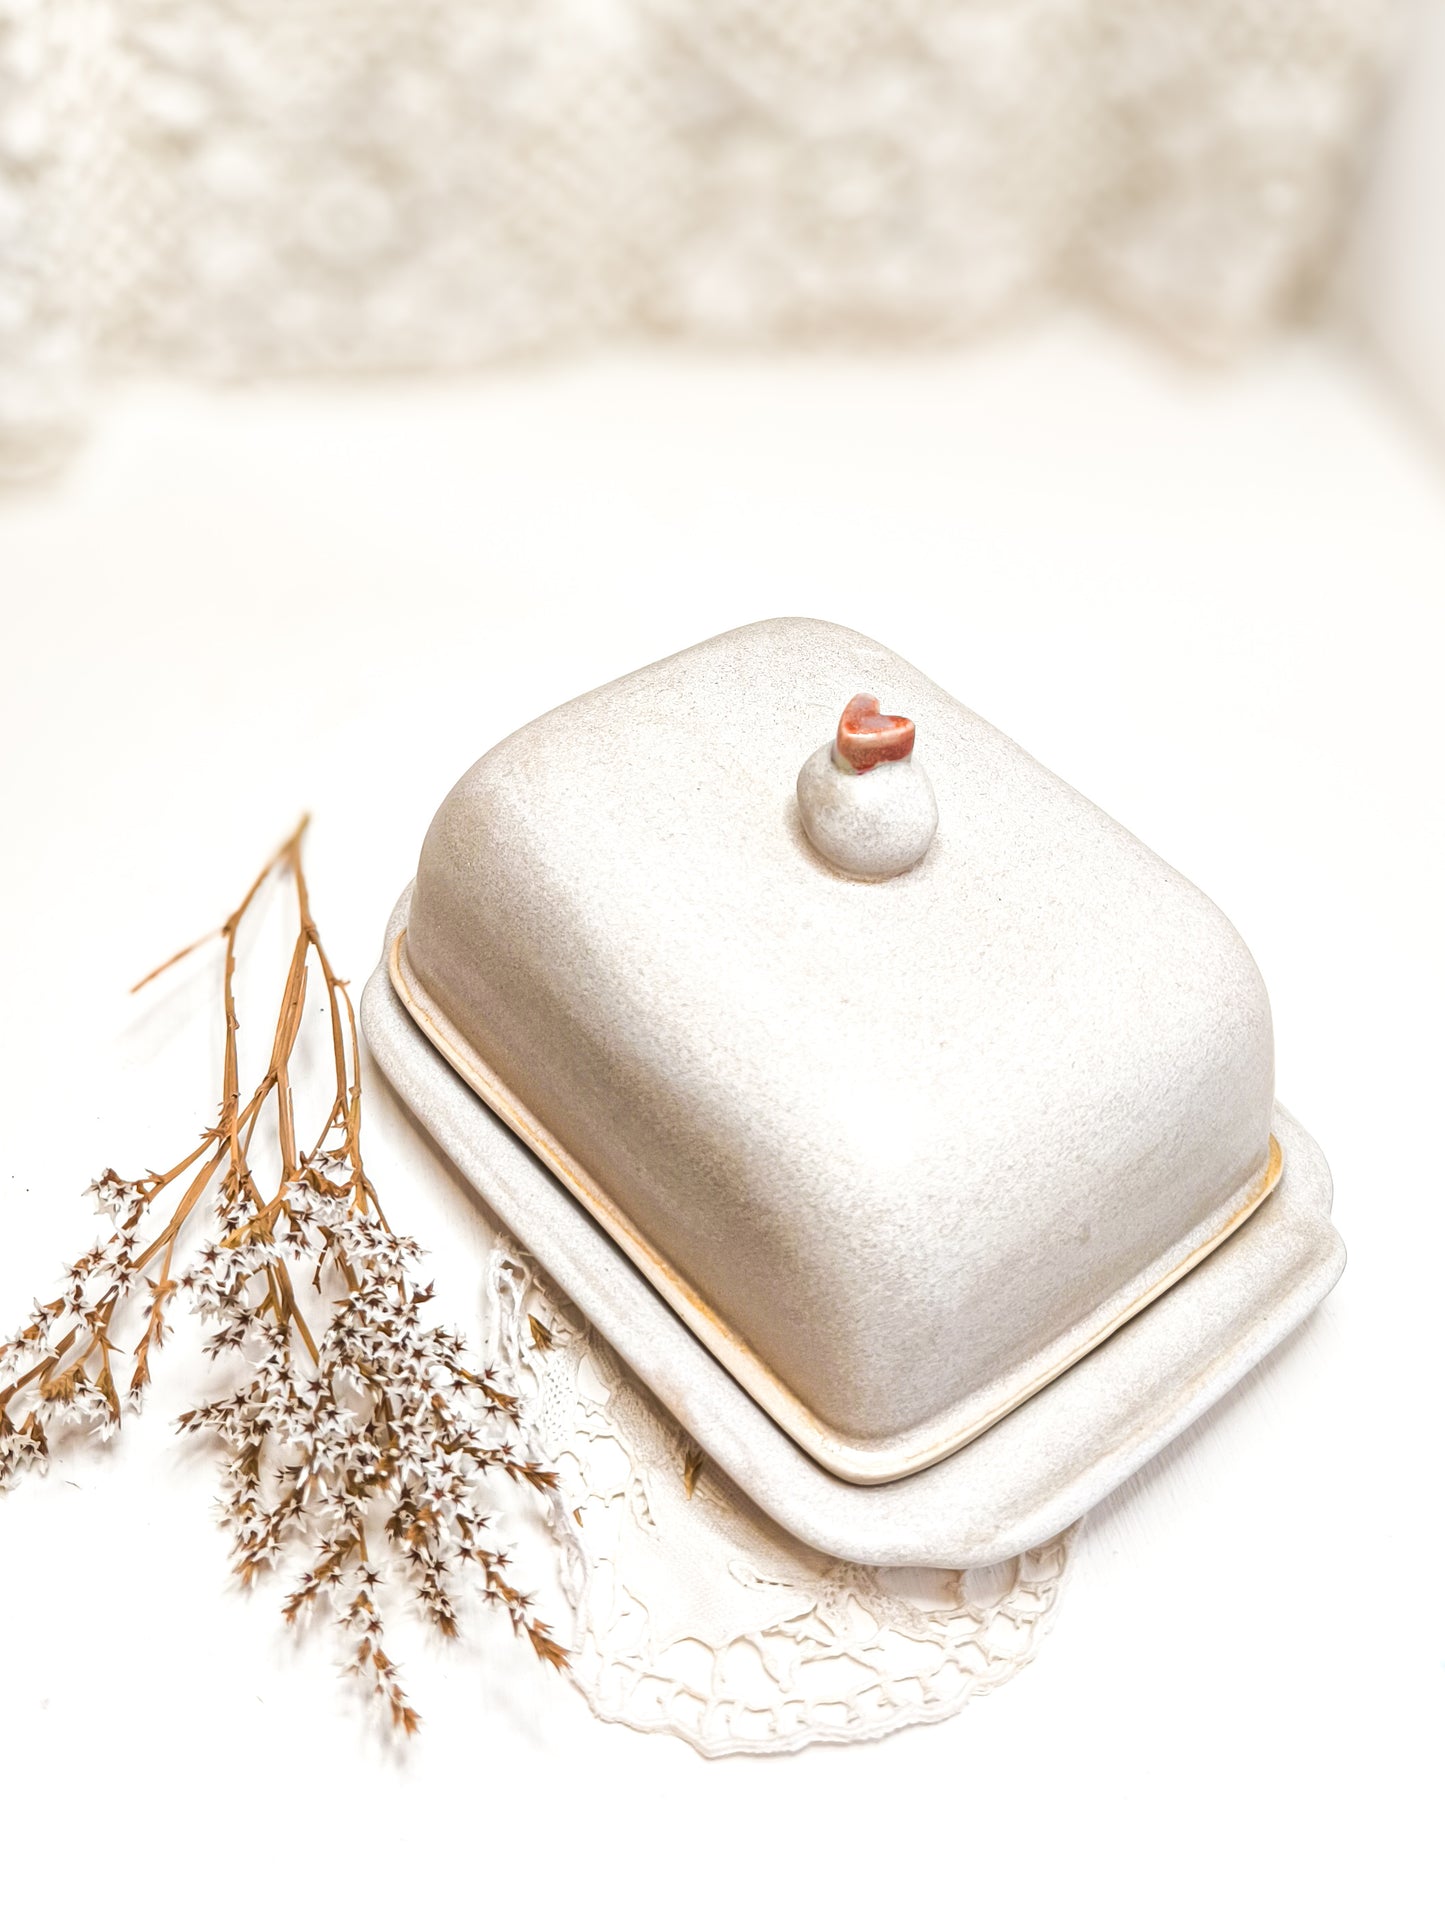 Ceramic butter dish with a heart motif